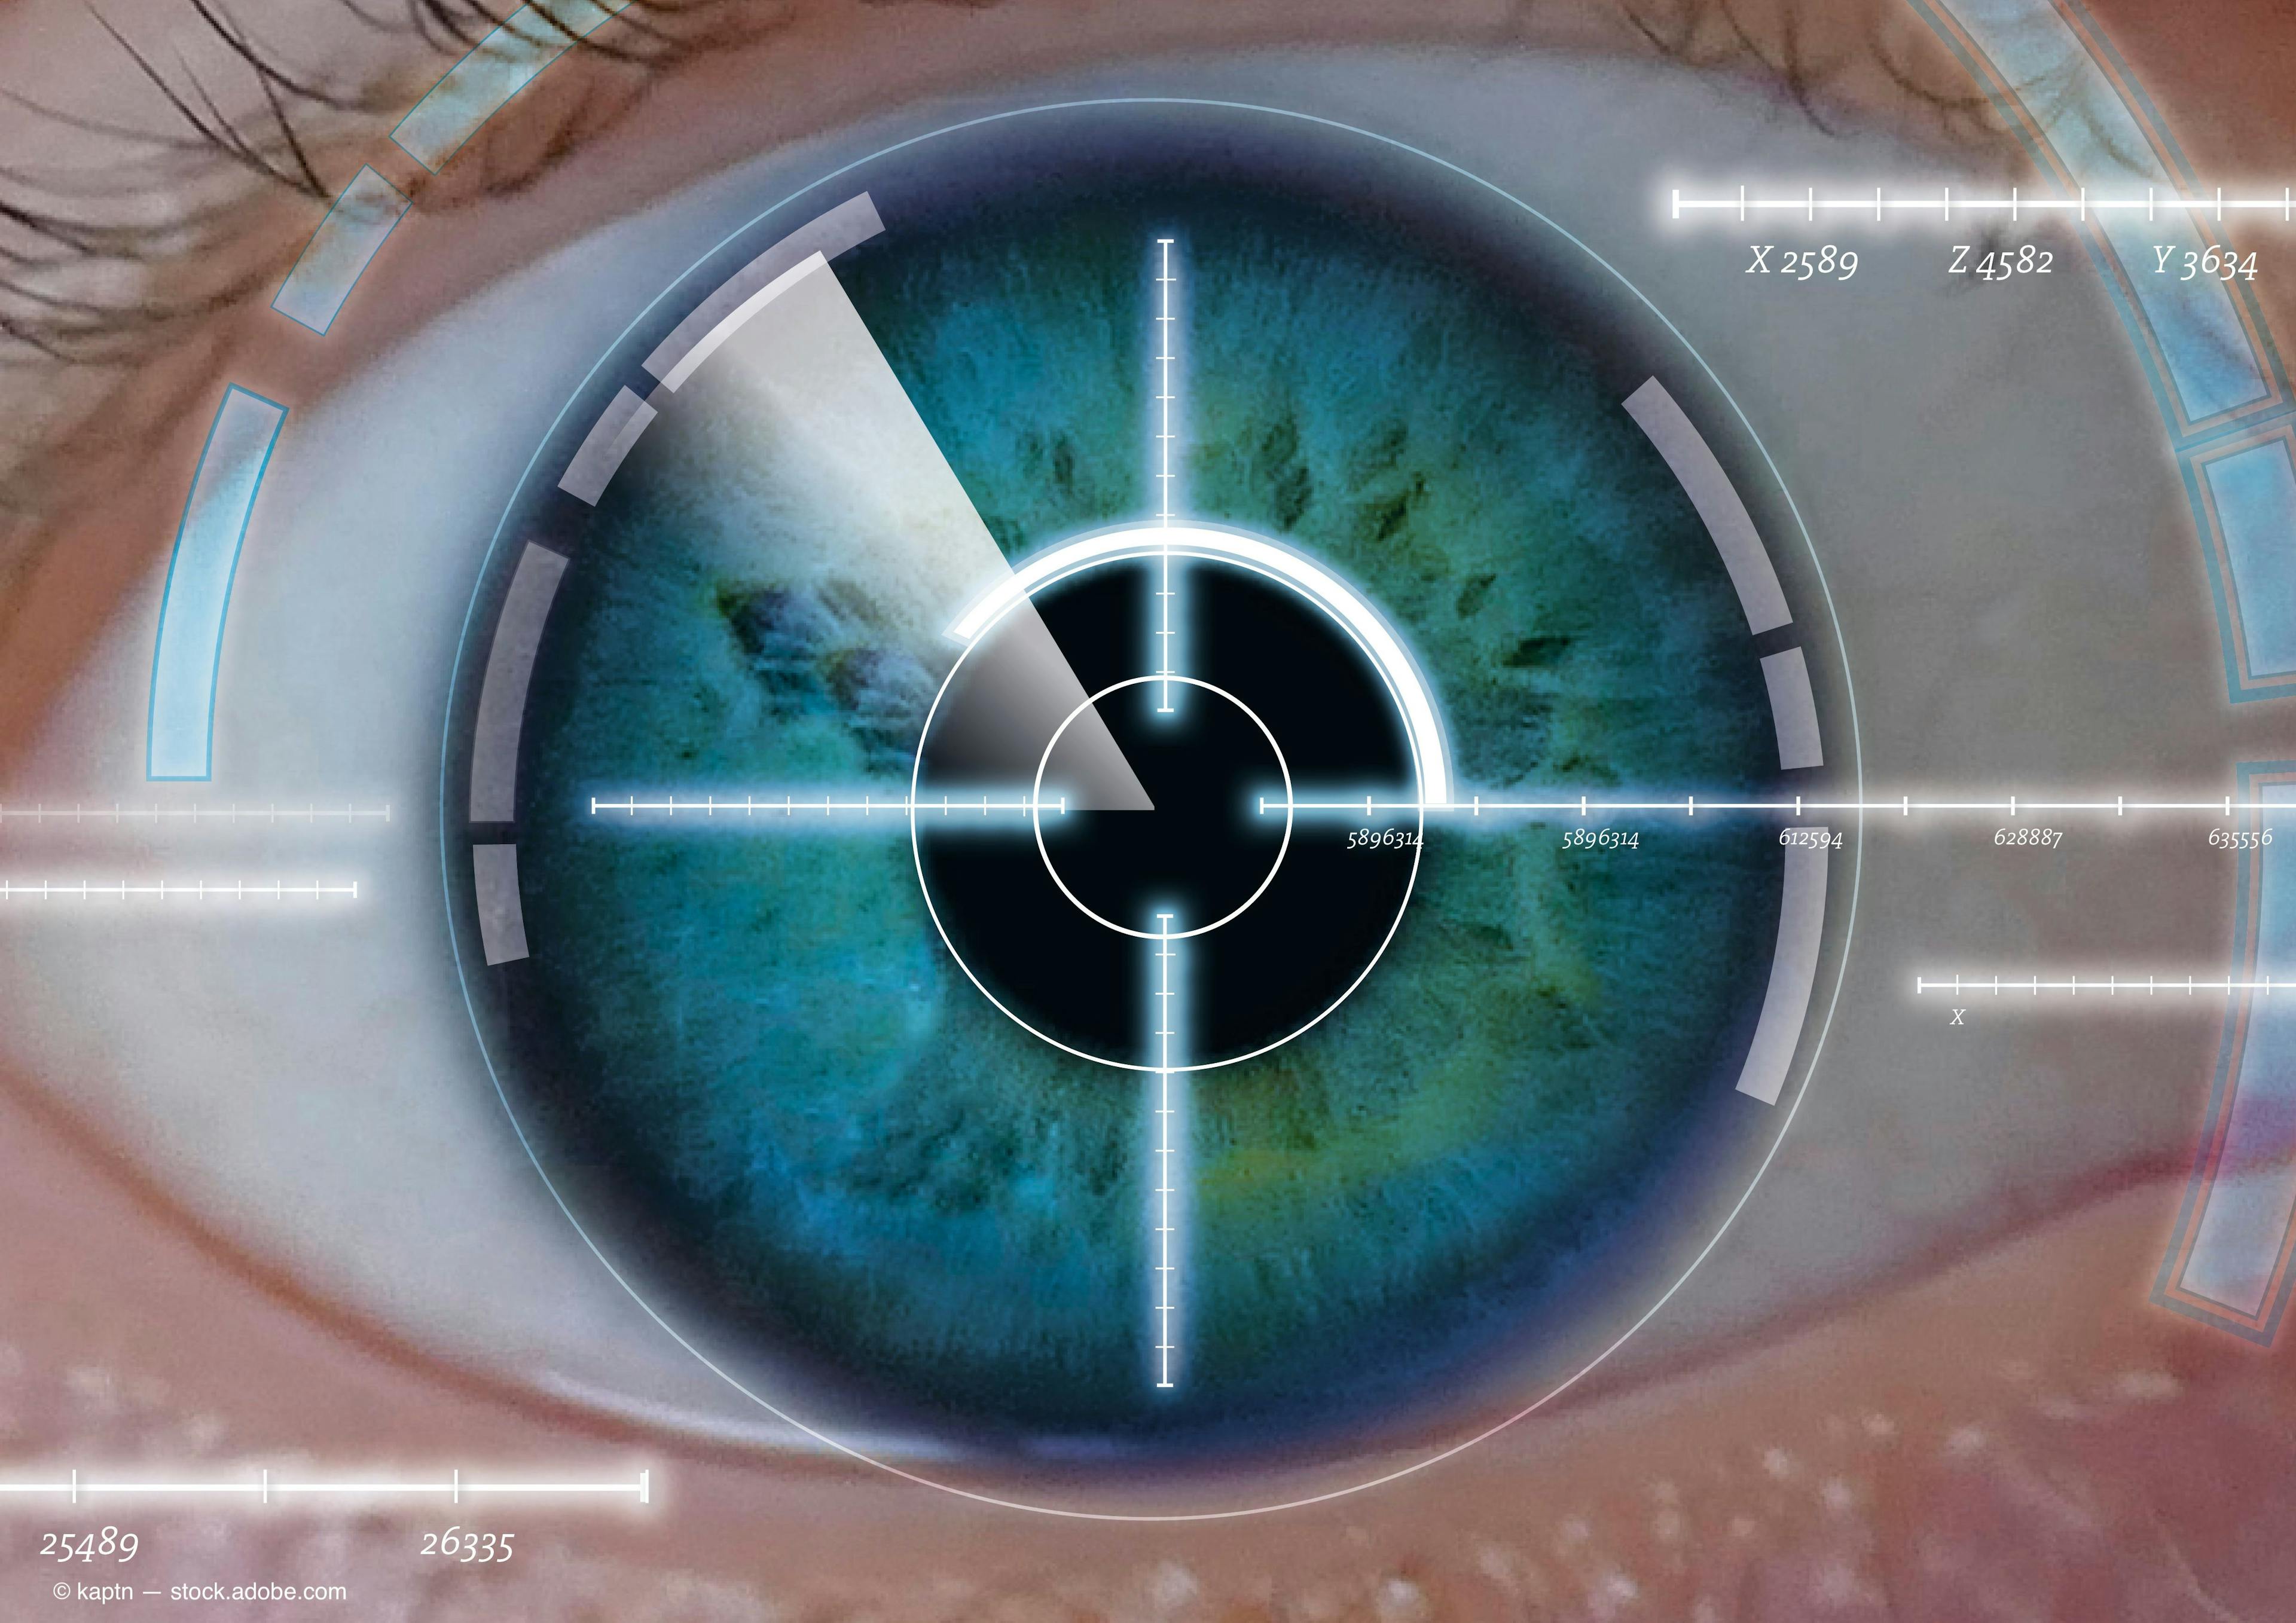 Corneal neurotization, a relatively new procedure that restores sensory innervation to a neurotrophic cornea by surgically transferring intact sensory donor nerve fibers to the cornea, seems to be safe and effective and can improve vision.